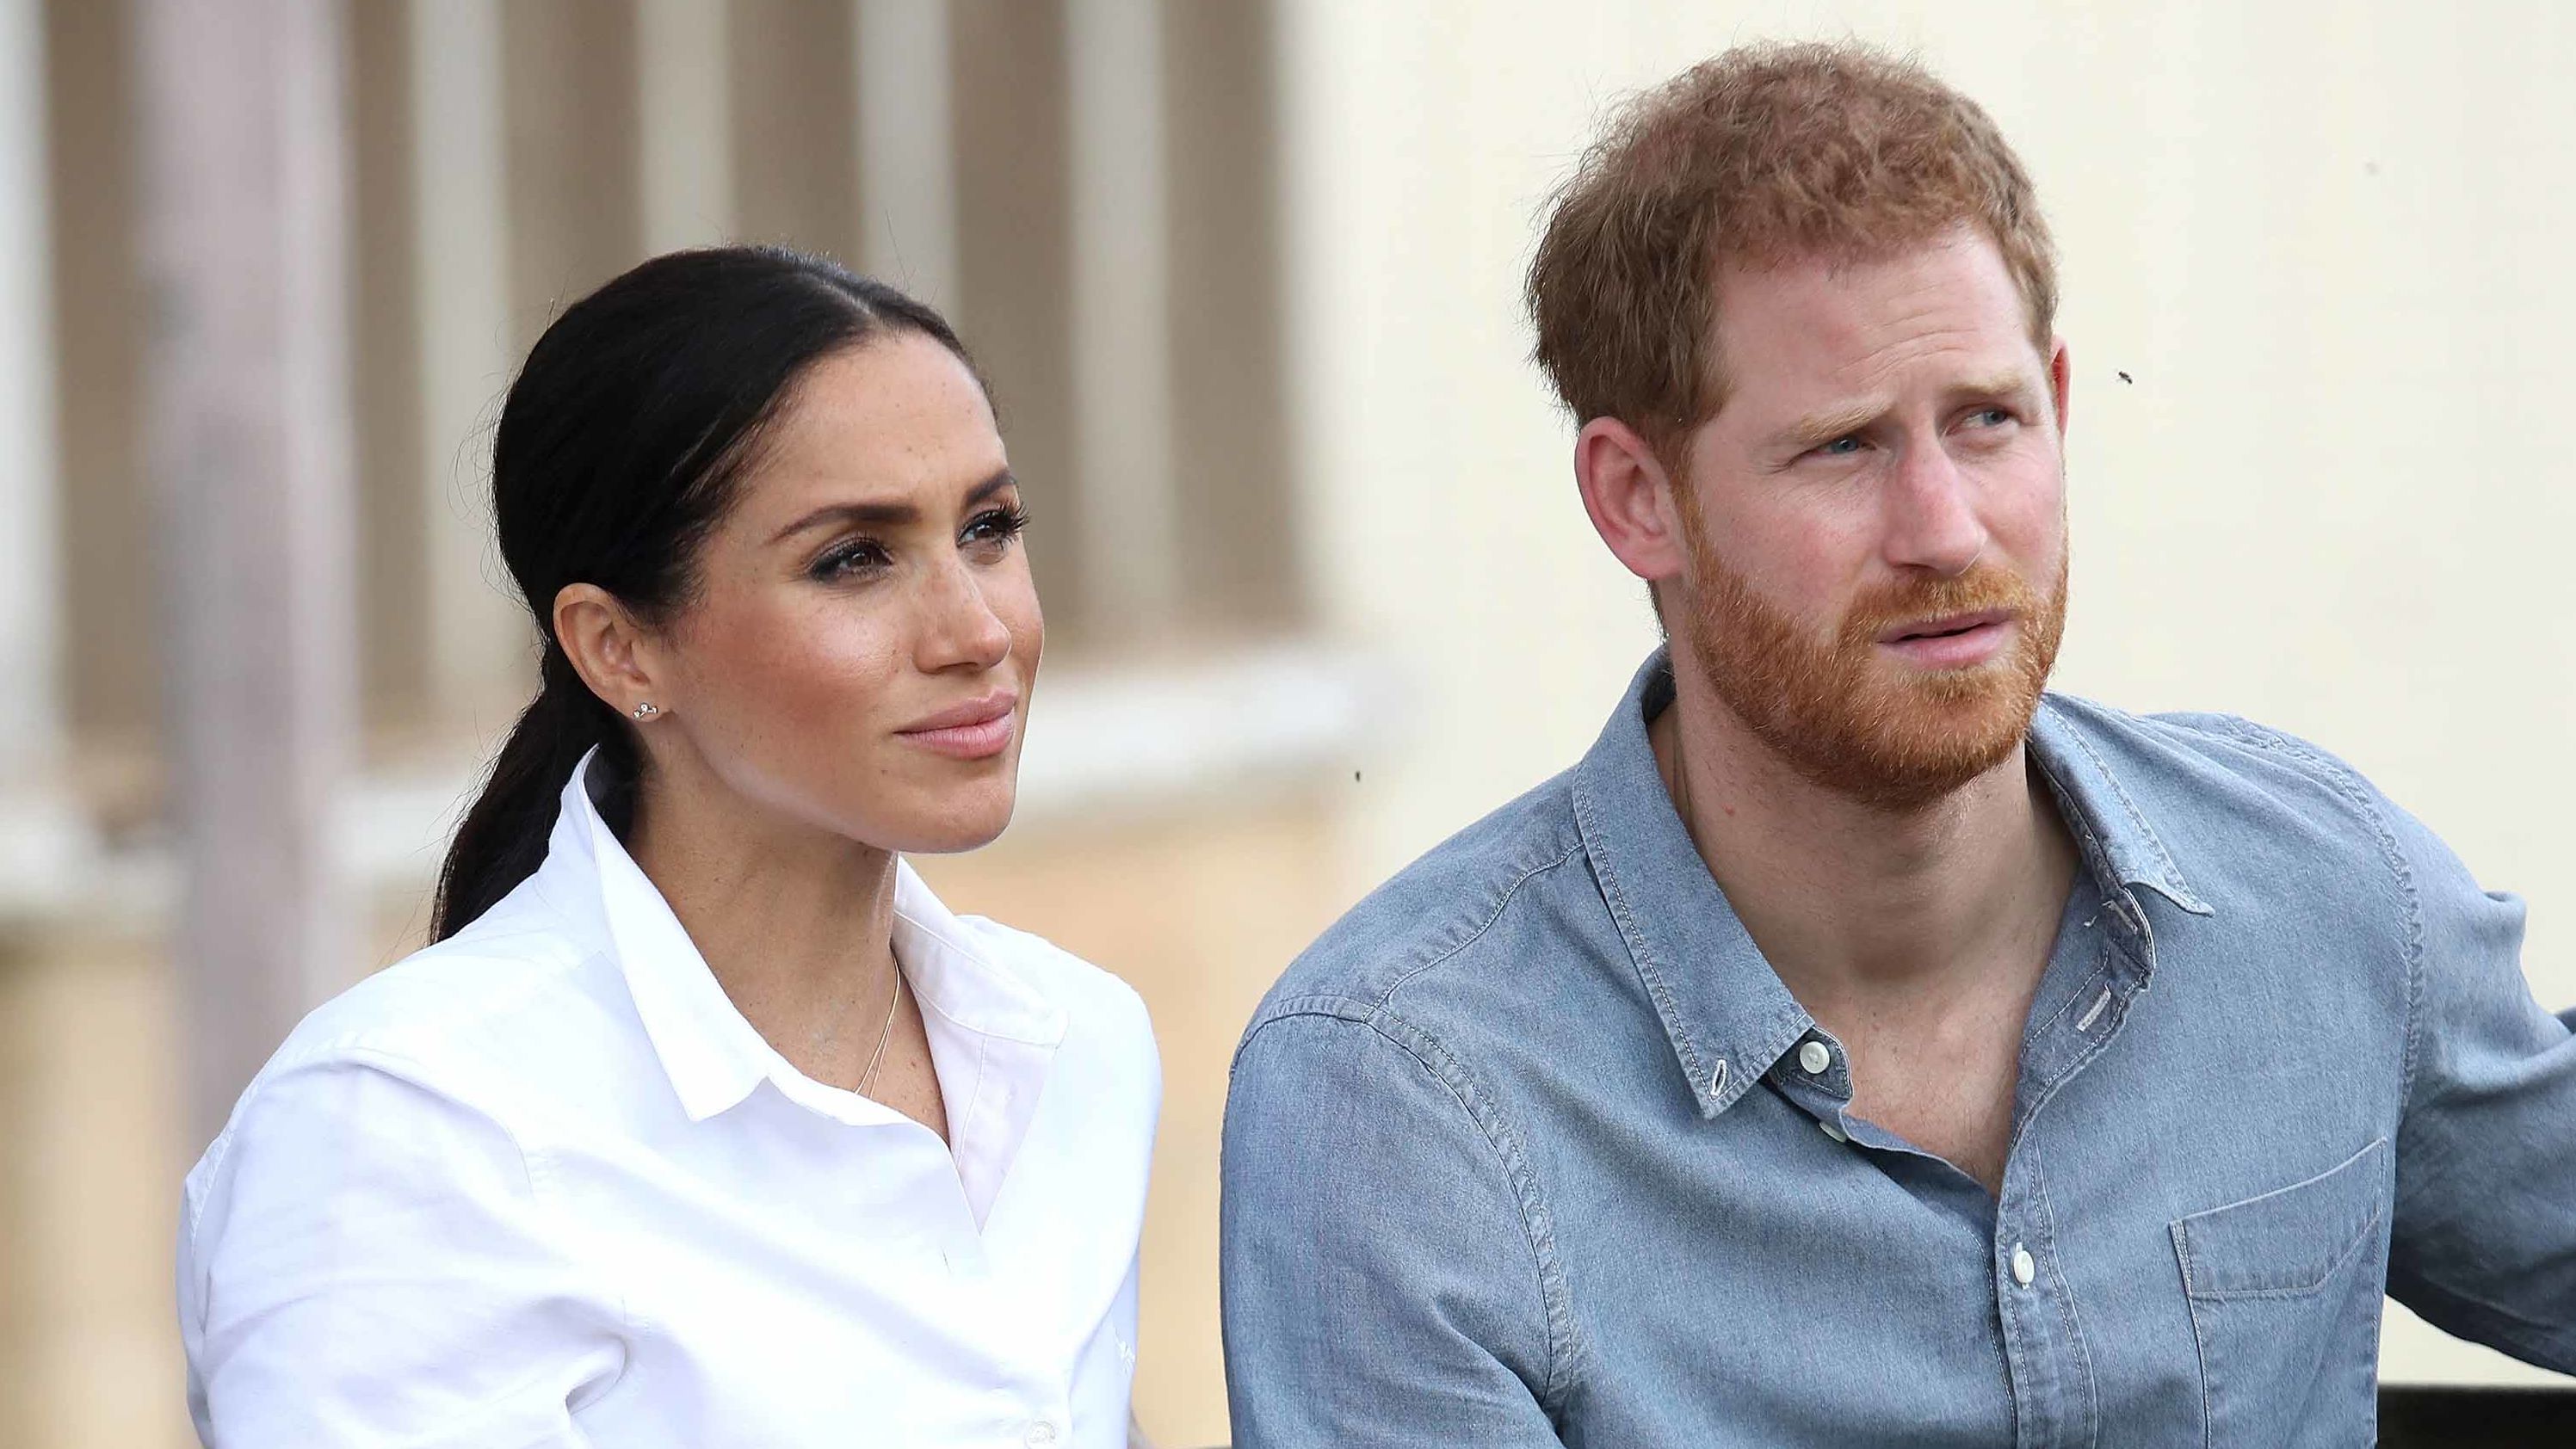 Michael Szewczuk reportedly branded Prince Harry a "race traitor" in online posts. 